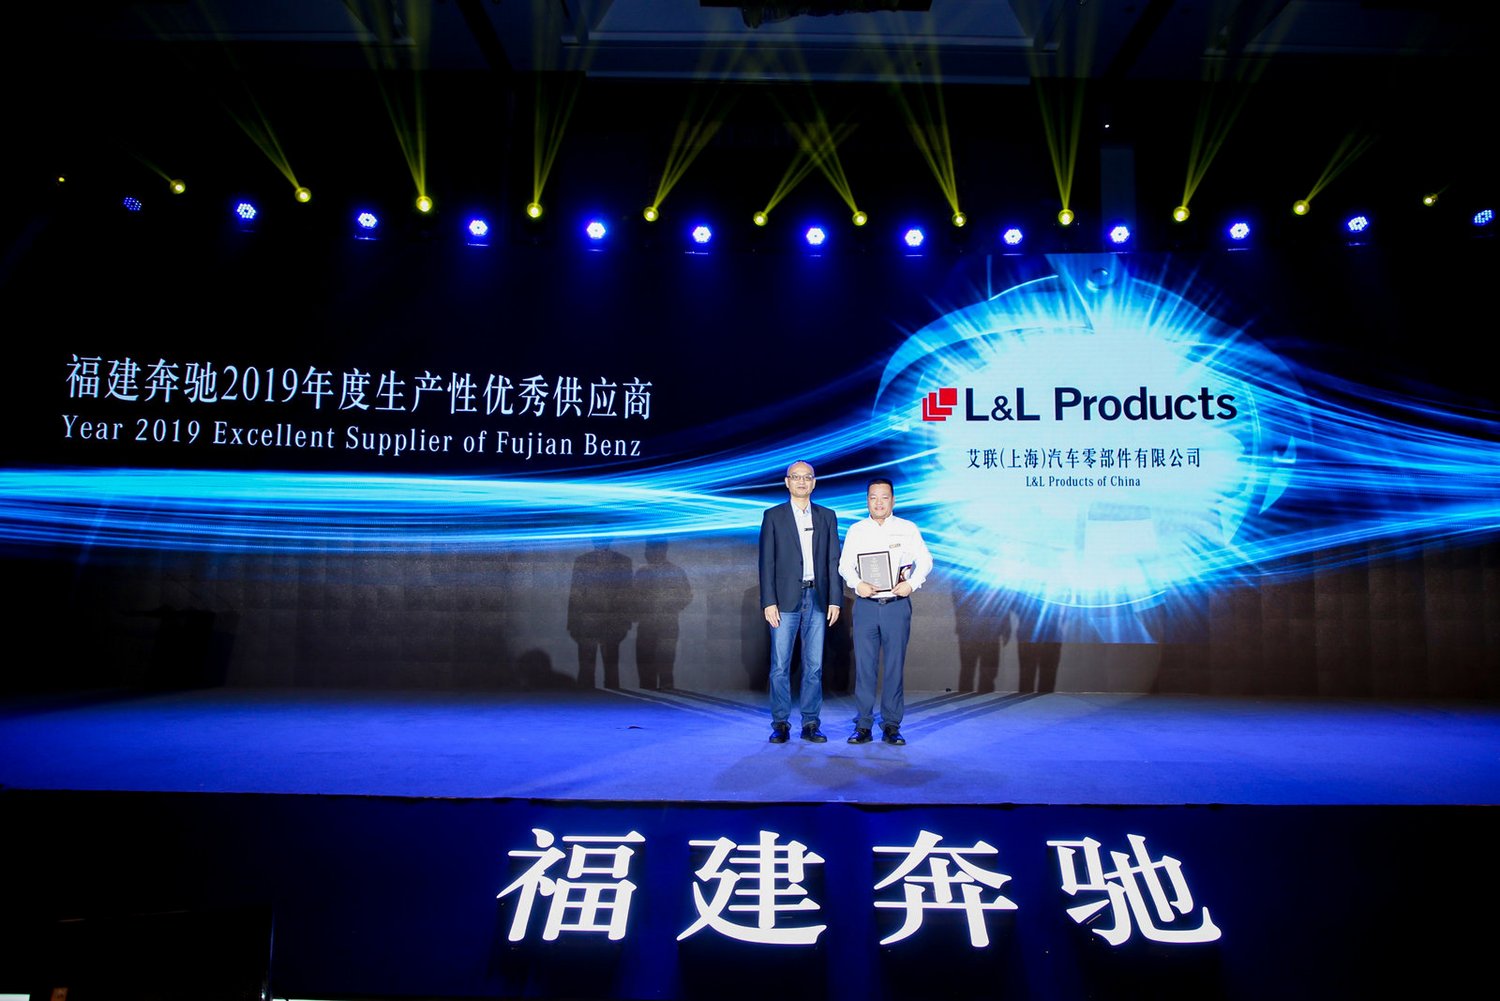 L&L Products China Awarded Excellent Supplier of the Year 2019 by Fujian Benz